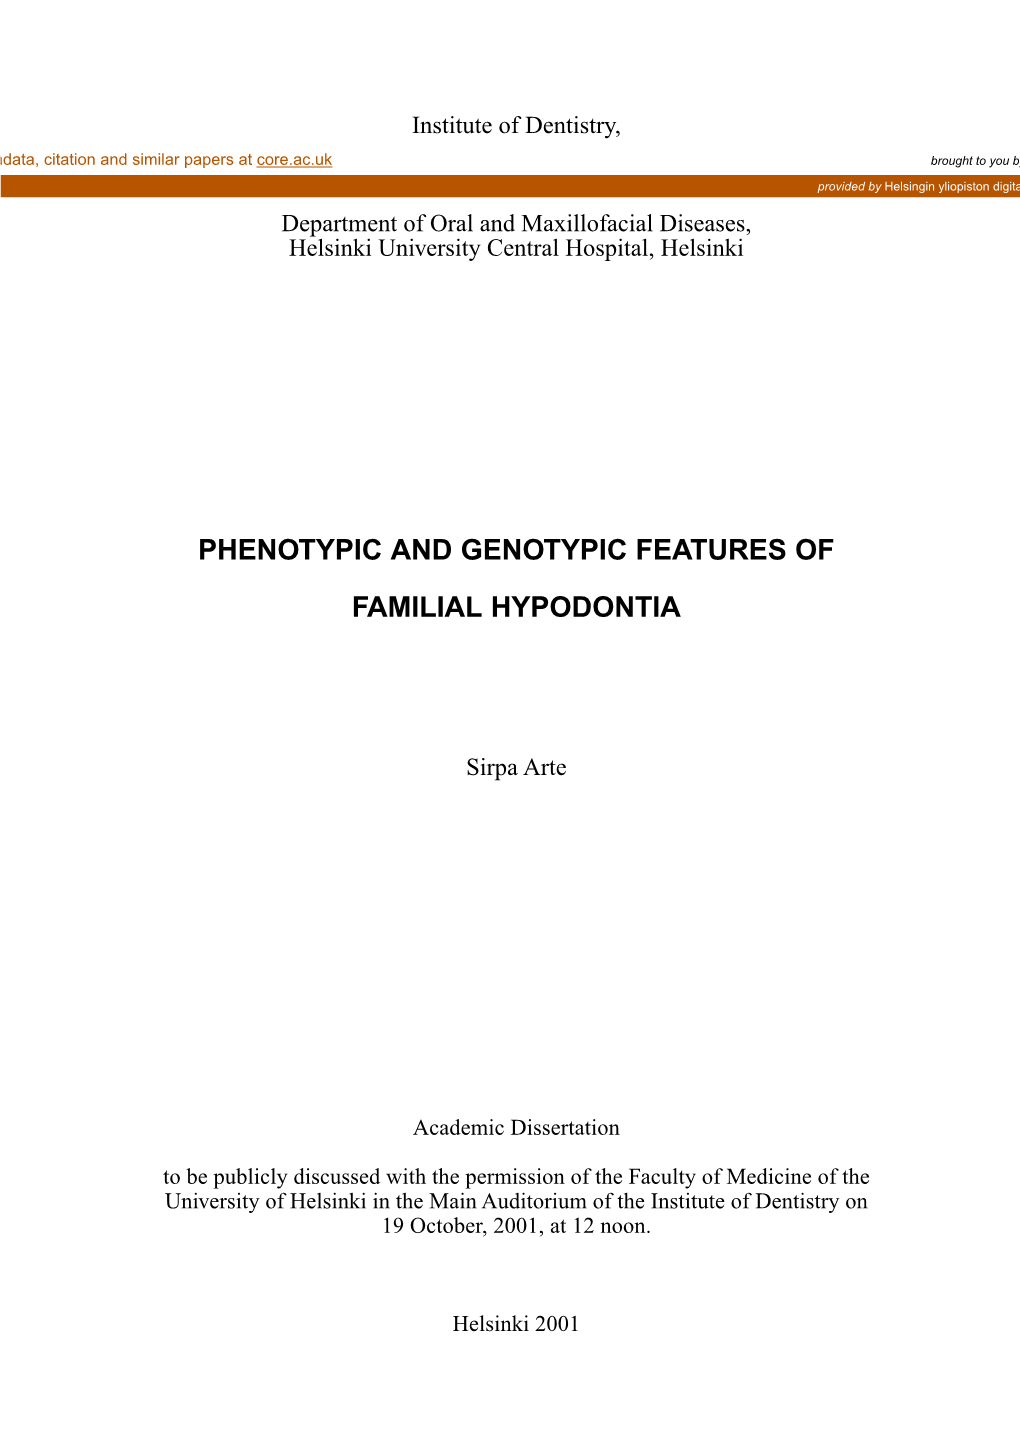 Phenotypic and Genotypic Features of Familial Hypodontia